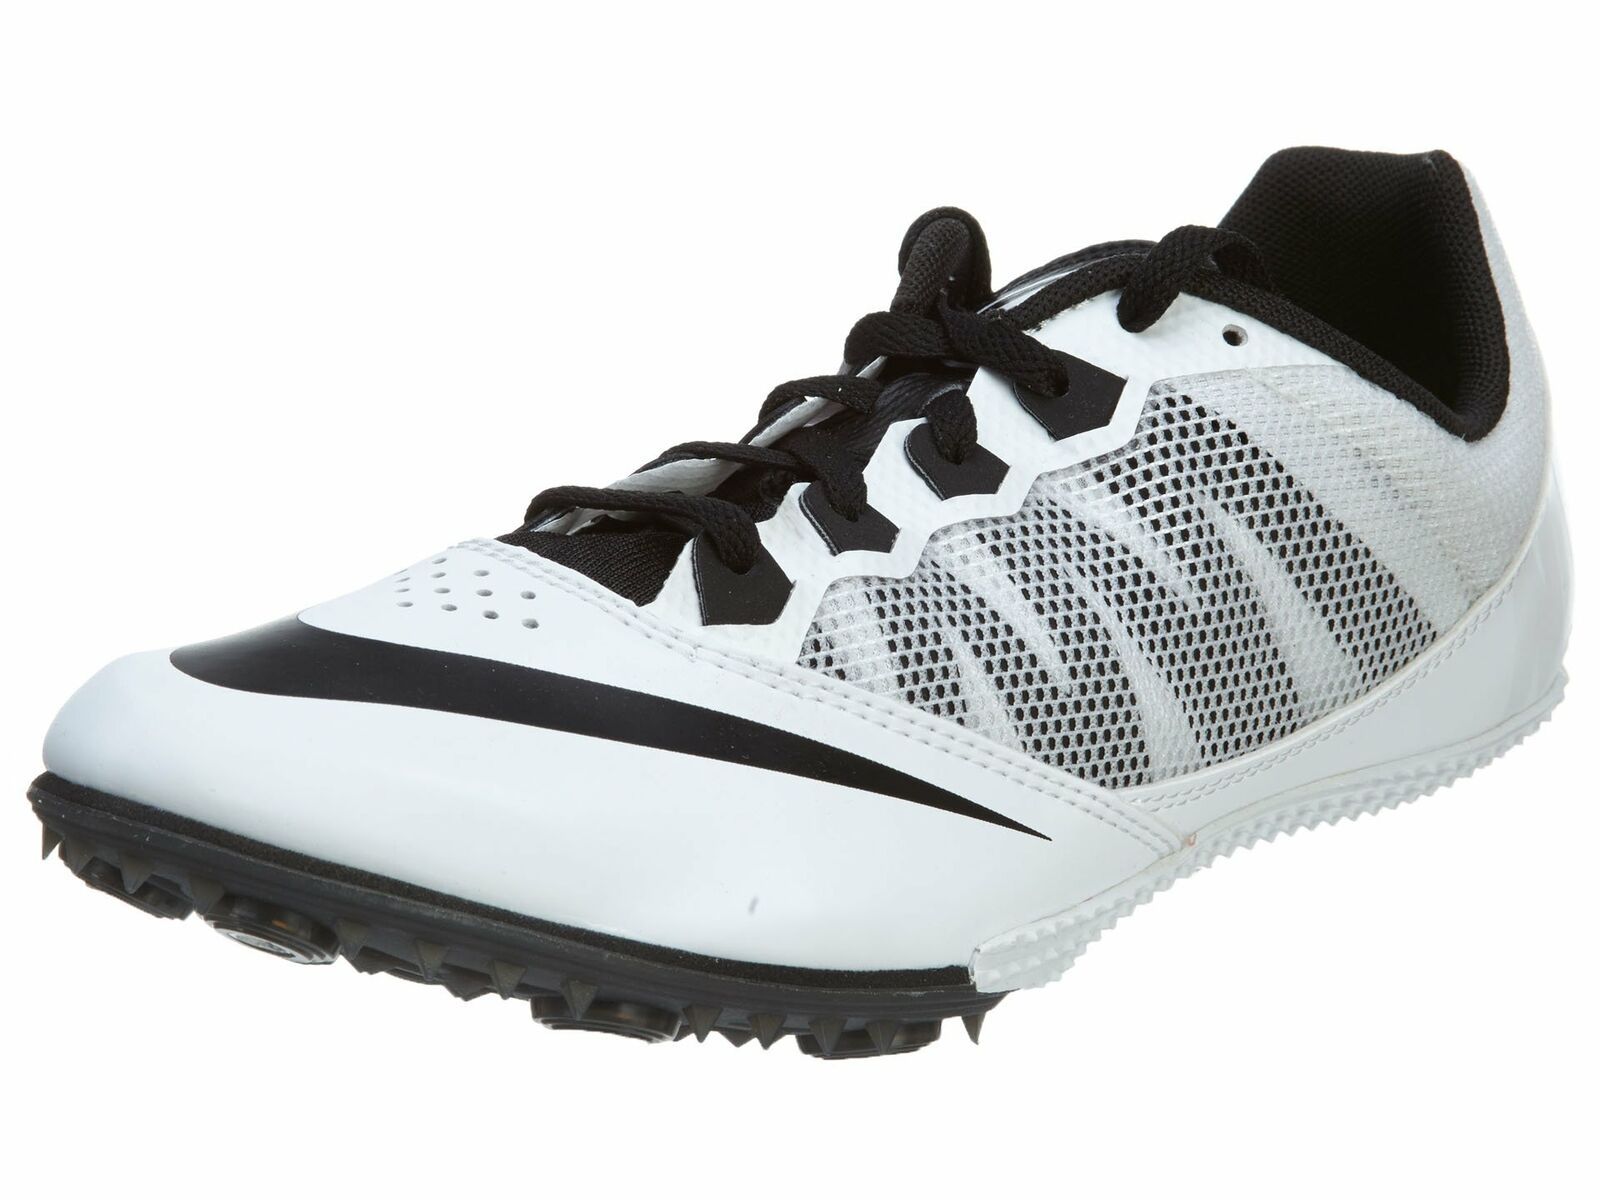 Nike Zoom Rival S 7 Running Spikes - 11 